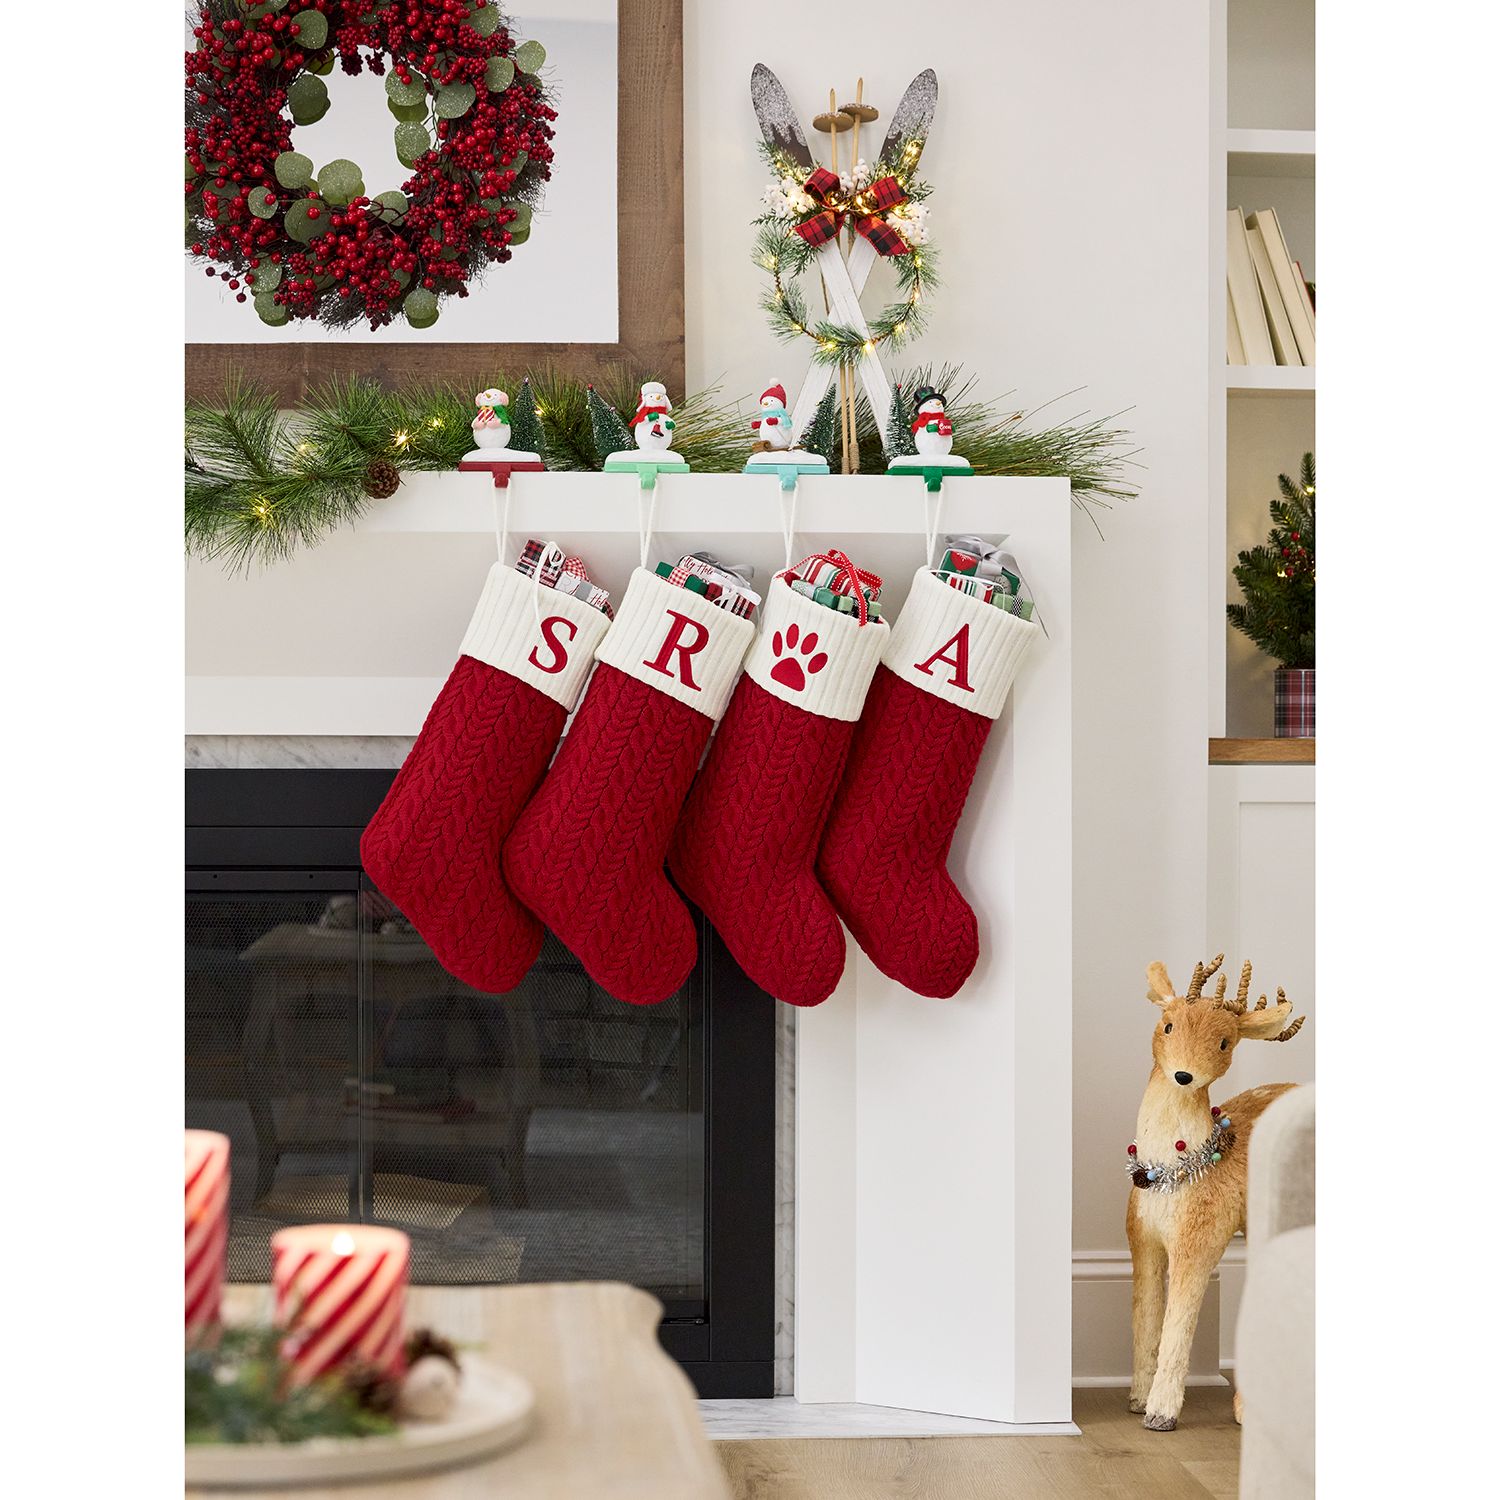 Forge a Festive Fireplace with Christmas Mantel Decorating Ideas from Kohl’s